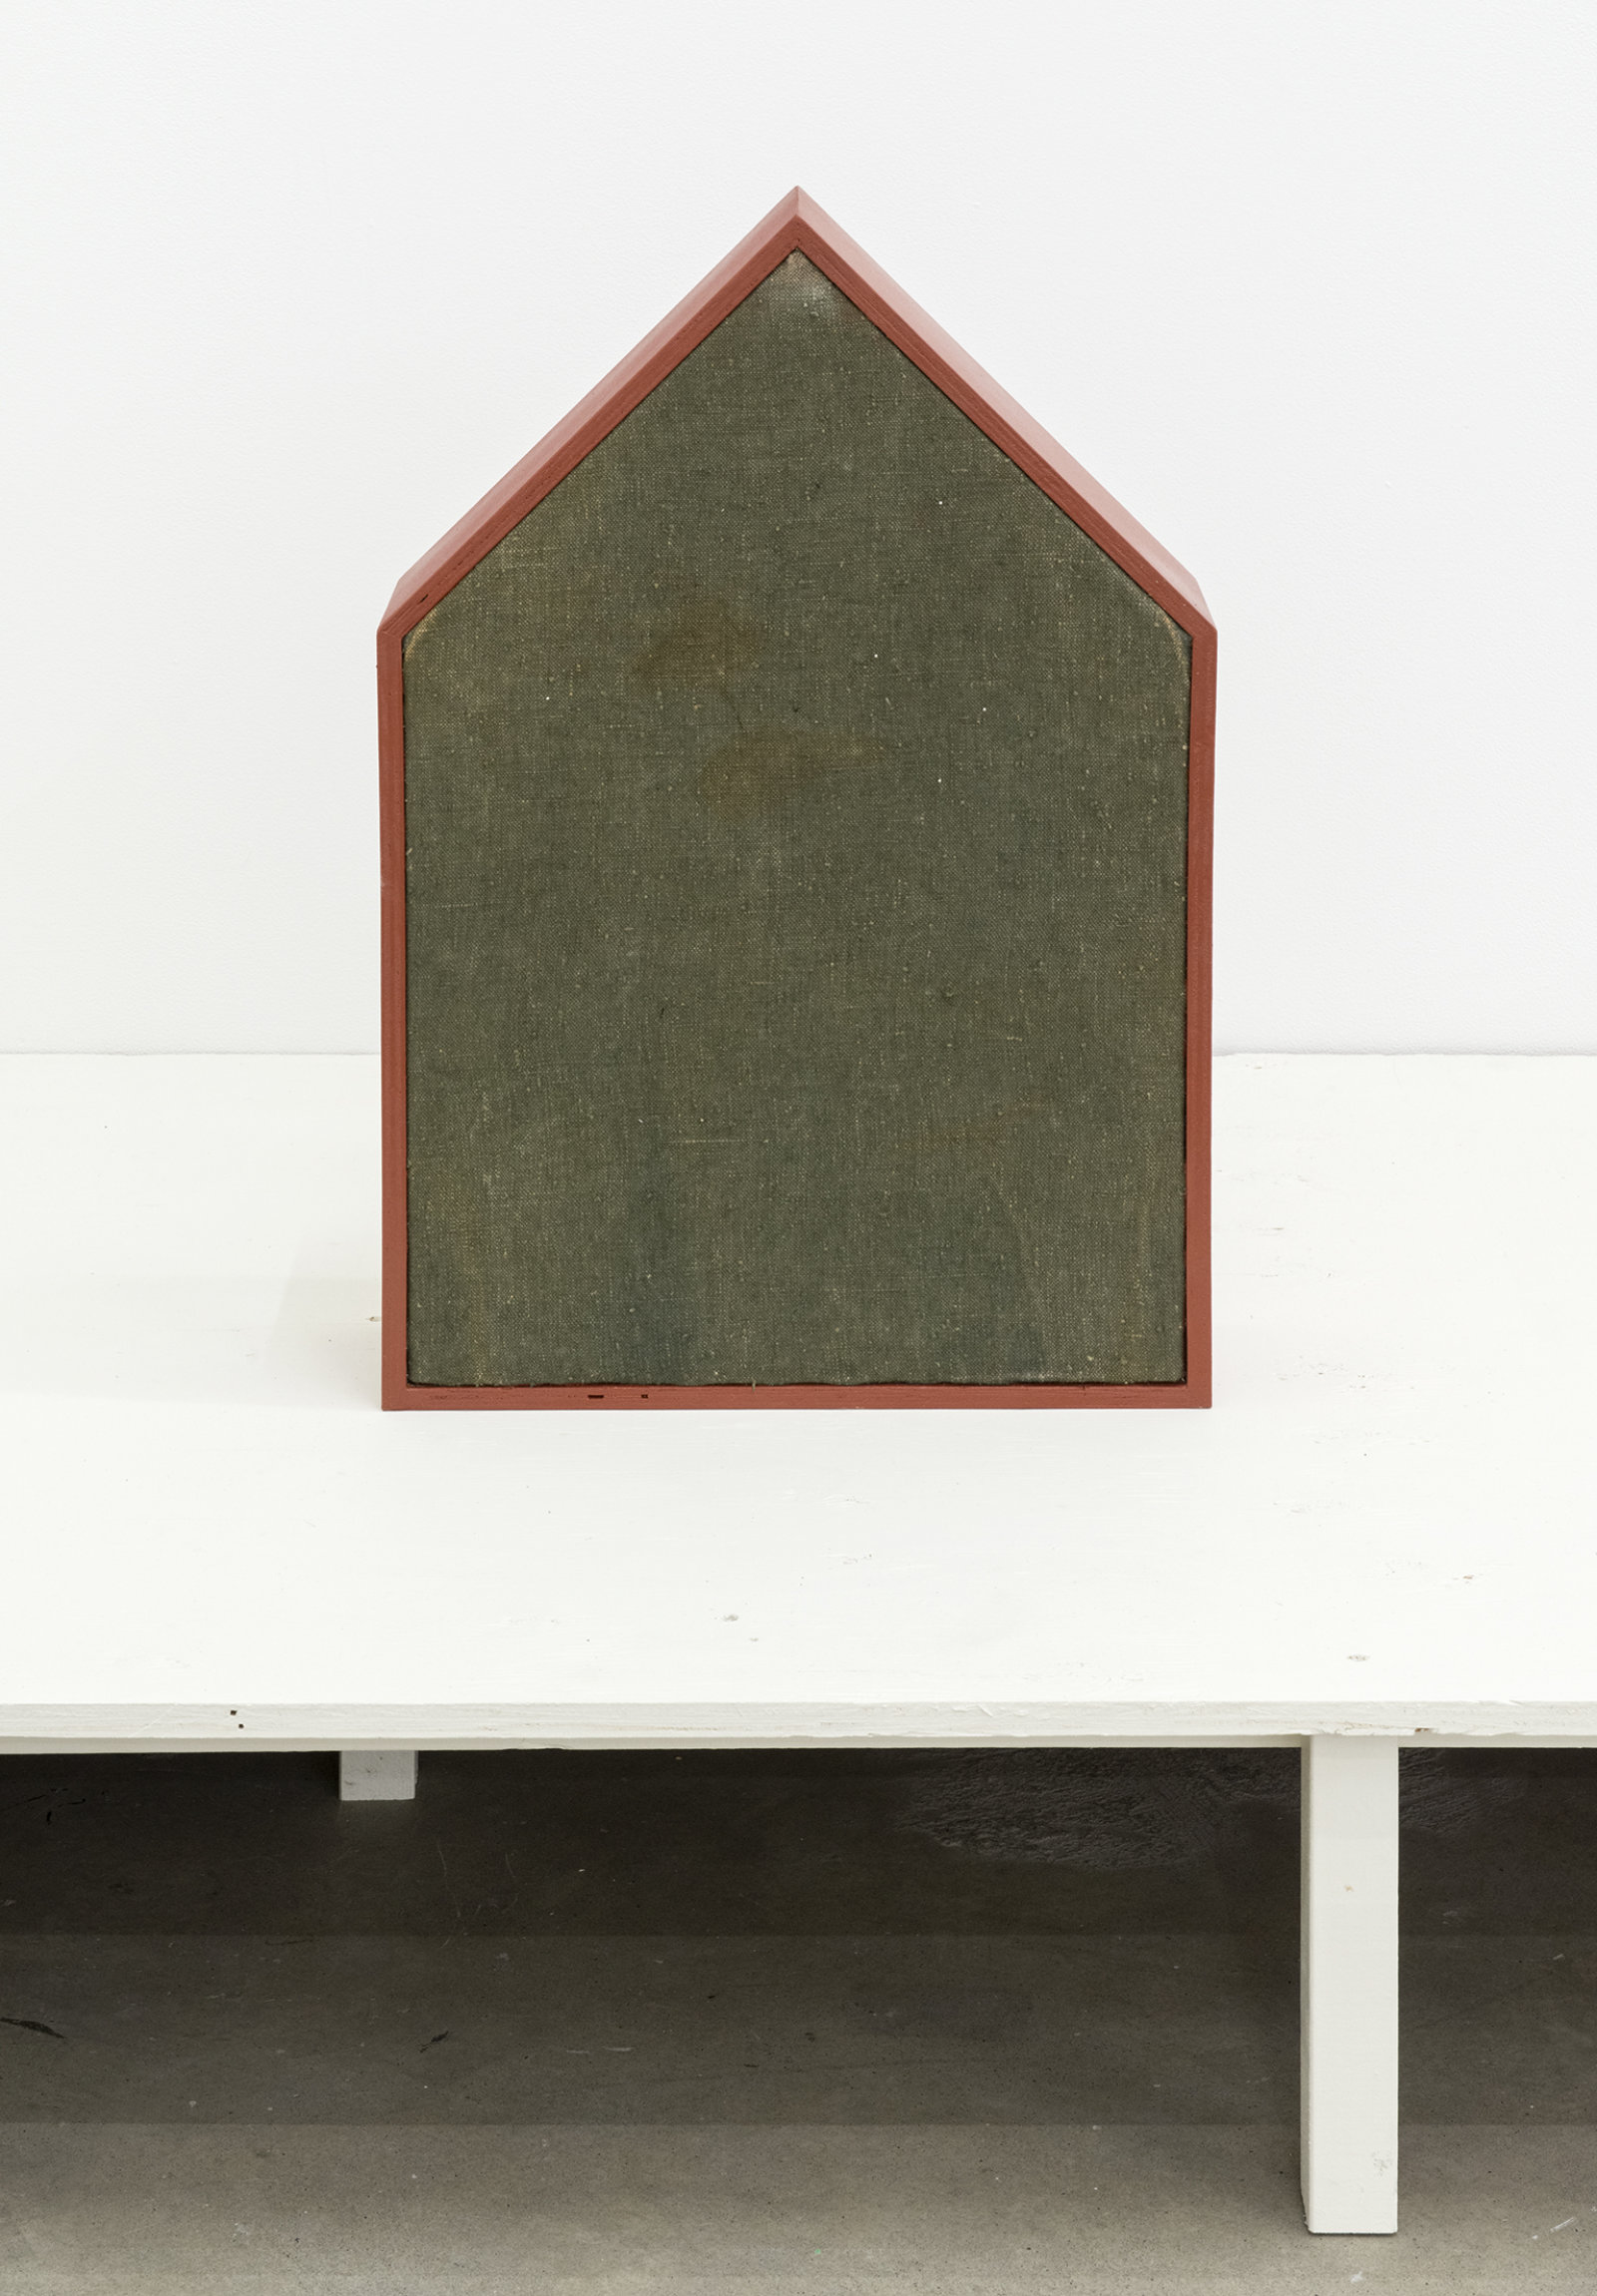 Ashes Withyman, WP-04 sP, 2013, hay, wood, guitar case fabric, paint, twine, 24 x 16 x 8 in. (61 x 41 x 20 cm)  